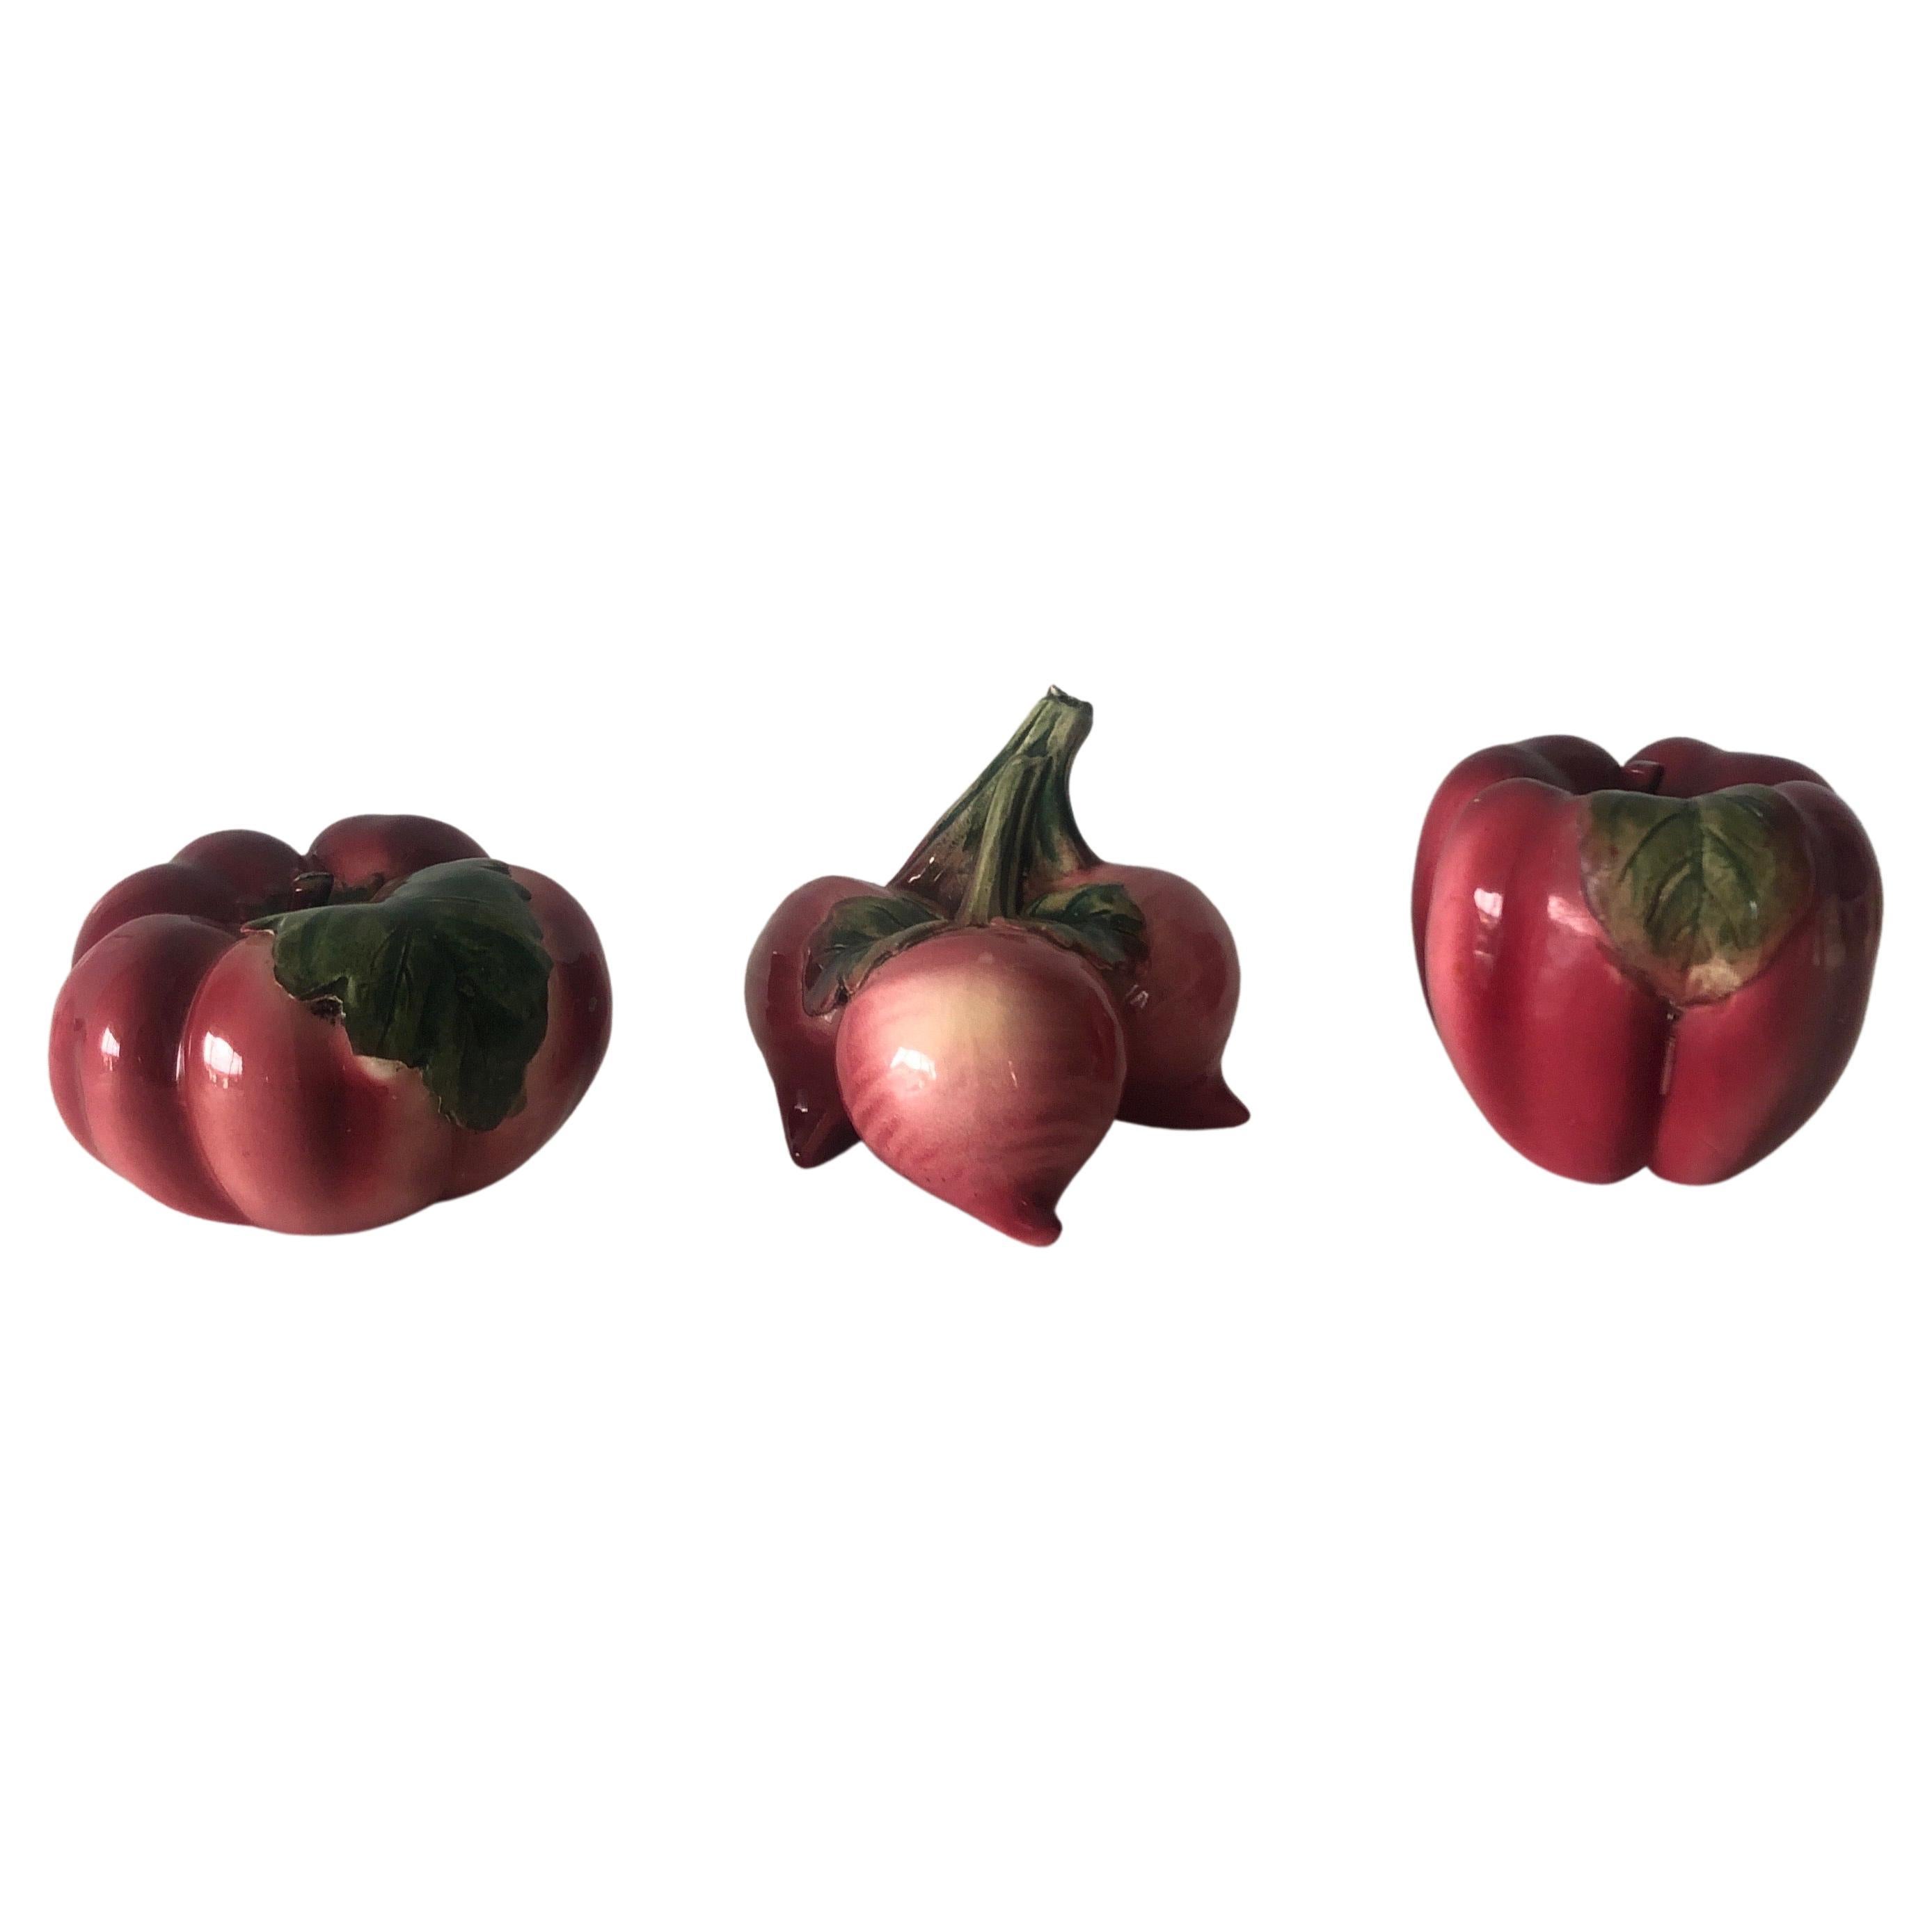 Set of (3) large red and green handcrafted ceramic decorative vegetables.
Ideal for a tray or on display at a kitchen counter or display cabinet.
Very realistic pottery.
-Tomato: 4.5 x 3
-Pepper: 3.5 x 3
-Radishes: 4.4 x 4.